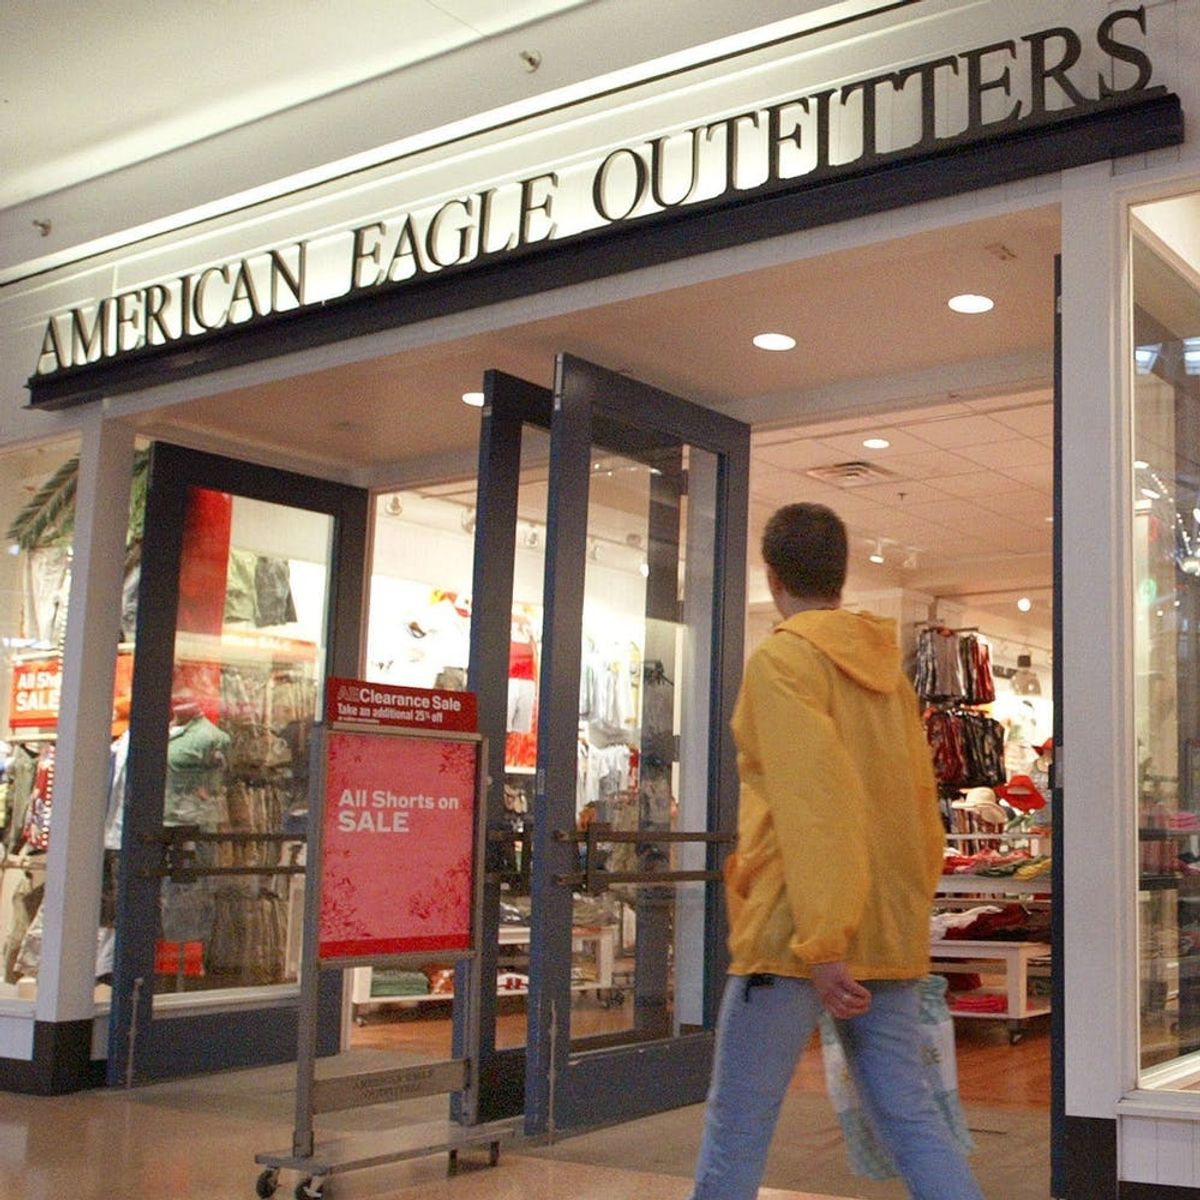 Customers Are Outraged Over This Controversial American Eagle Bracelet